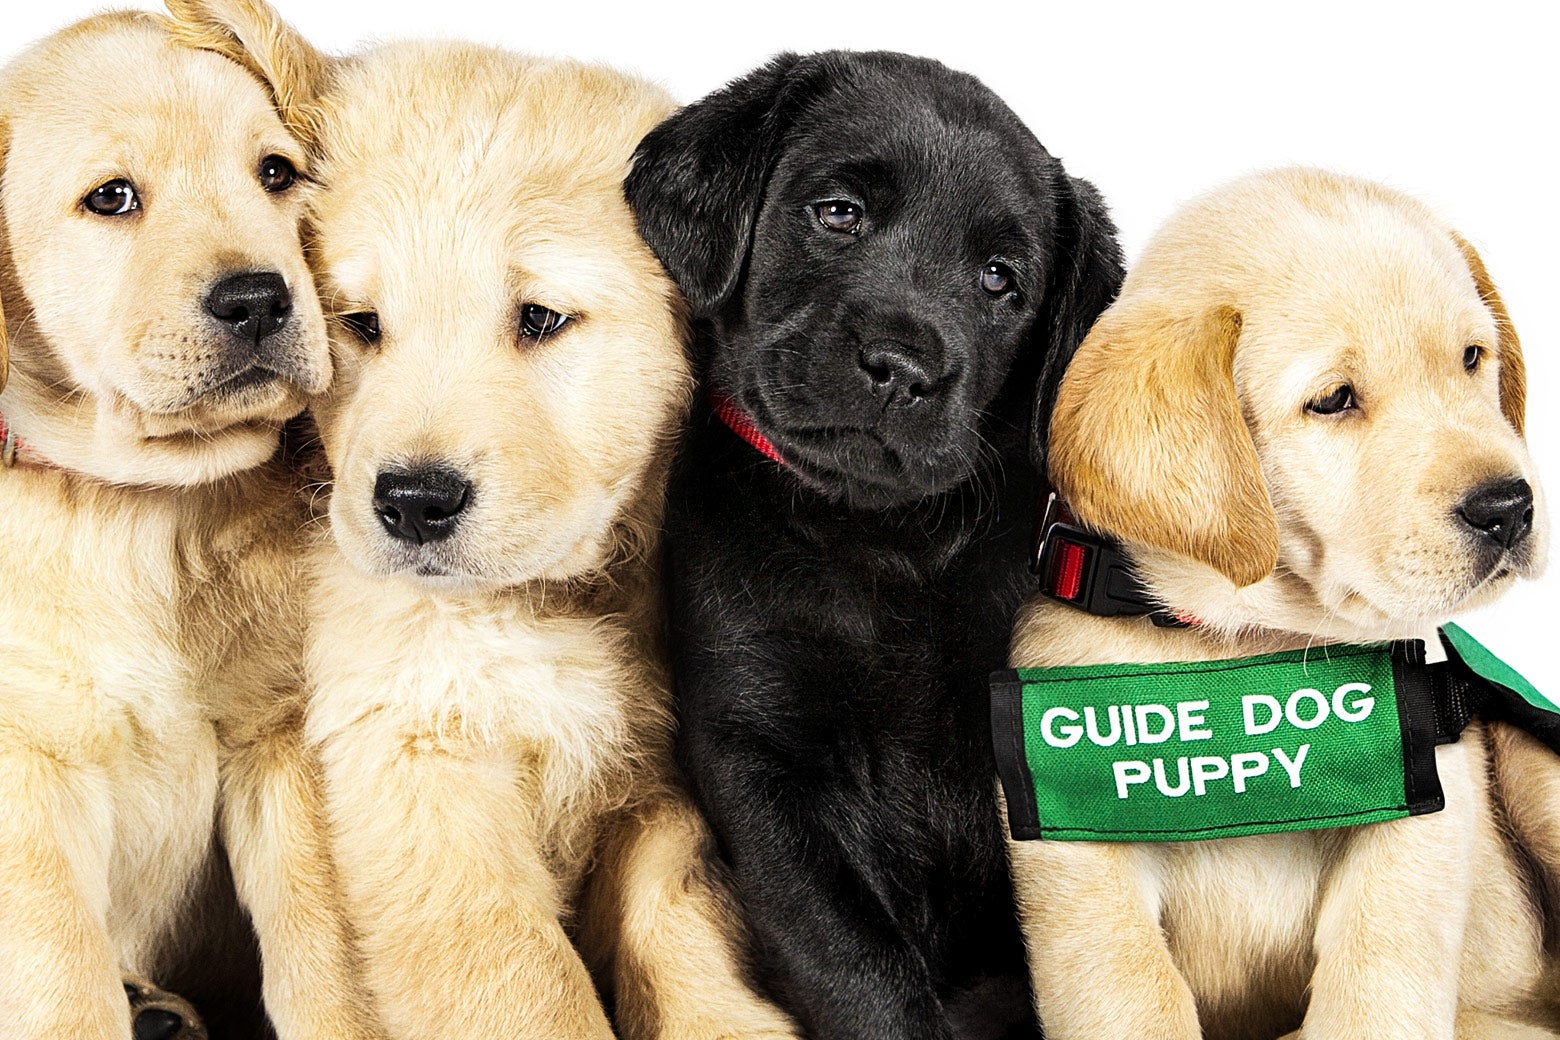 Four puppies from the movie Pick of the Litter. One wears a strap that says "GUIDE DOG PUPPY."